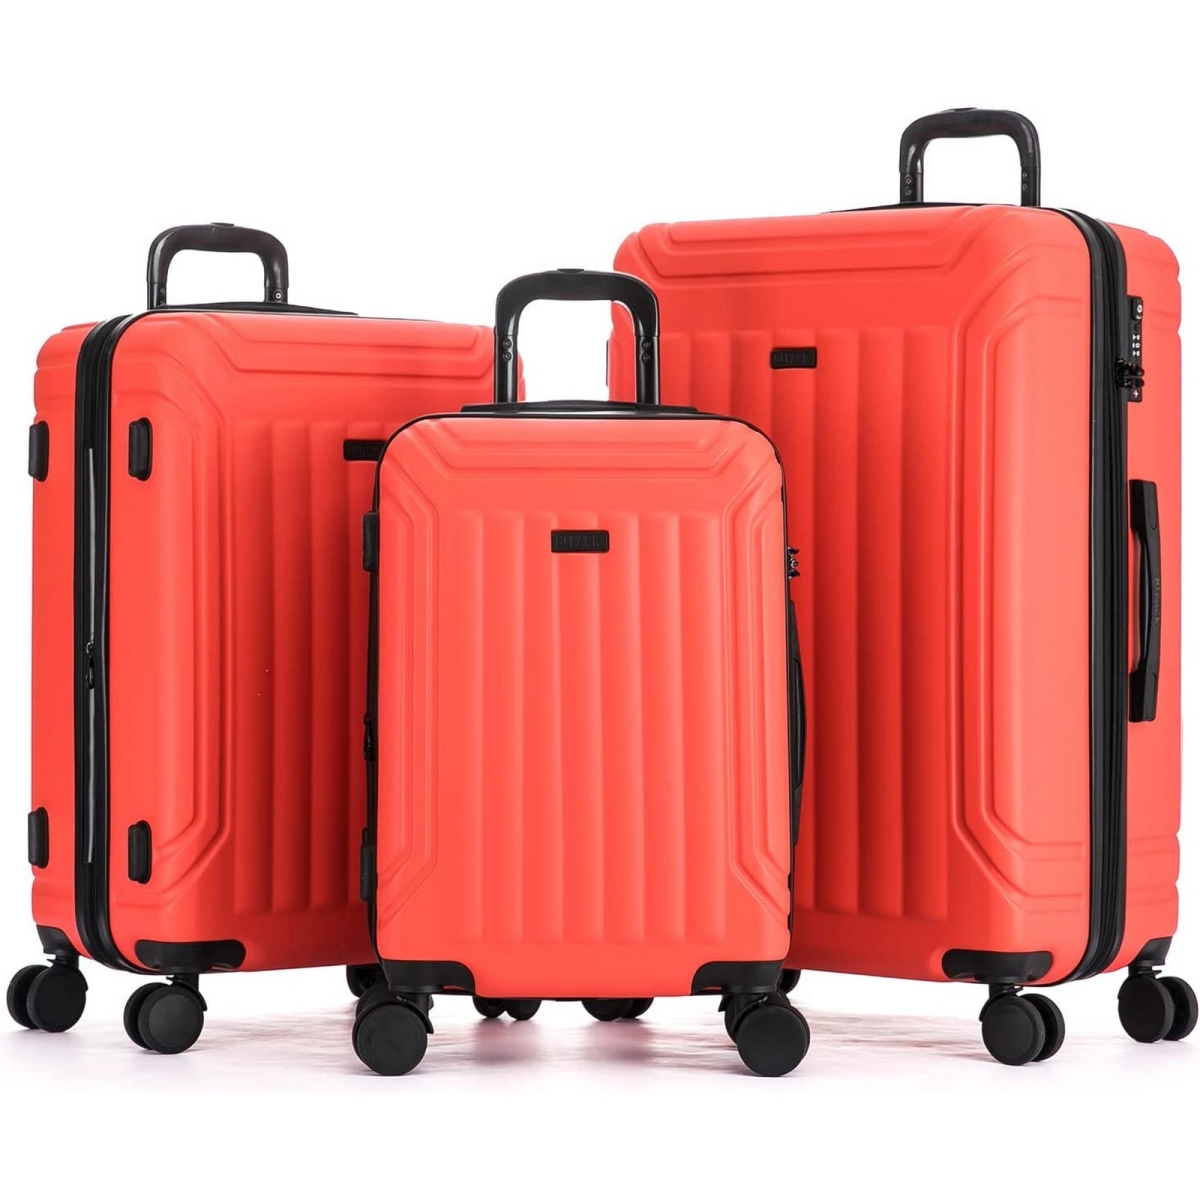 Picture of Hipack 25HP2107-RED Hipack Rover   Generation Hardside 3-Piece Luggage Set - Red